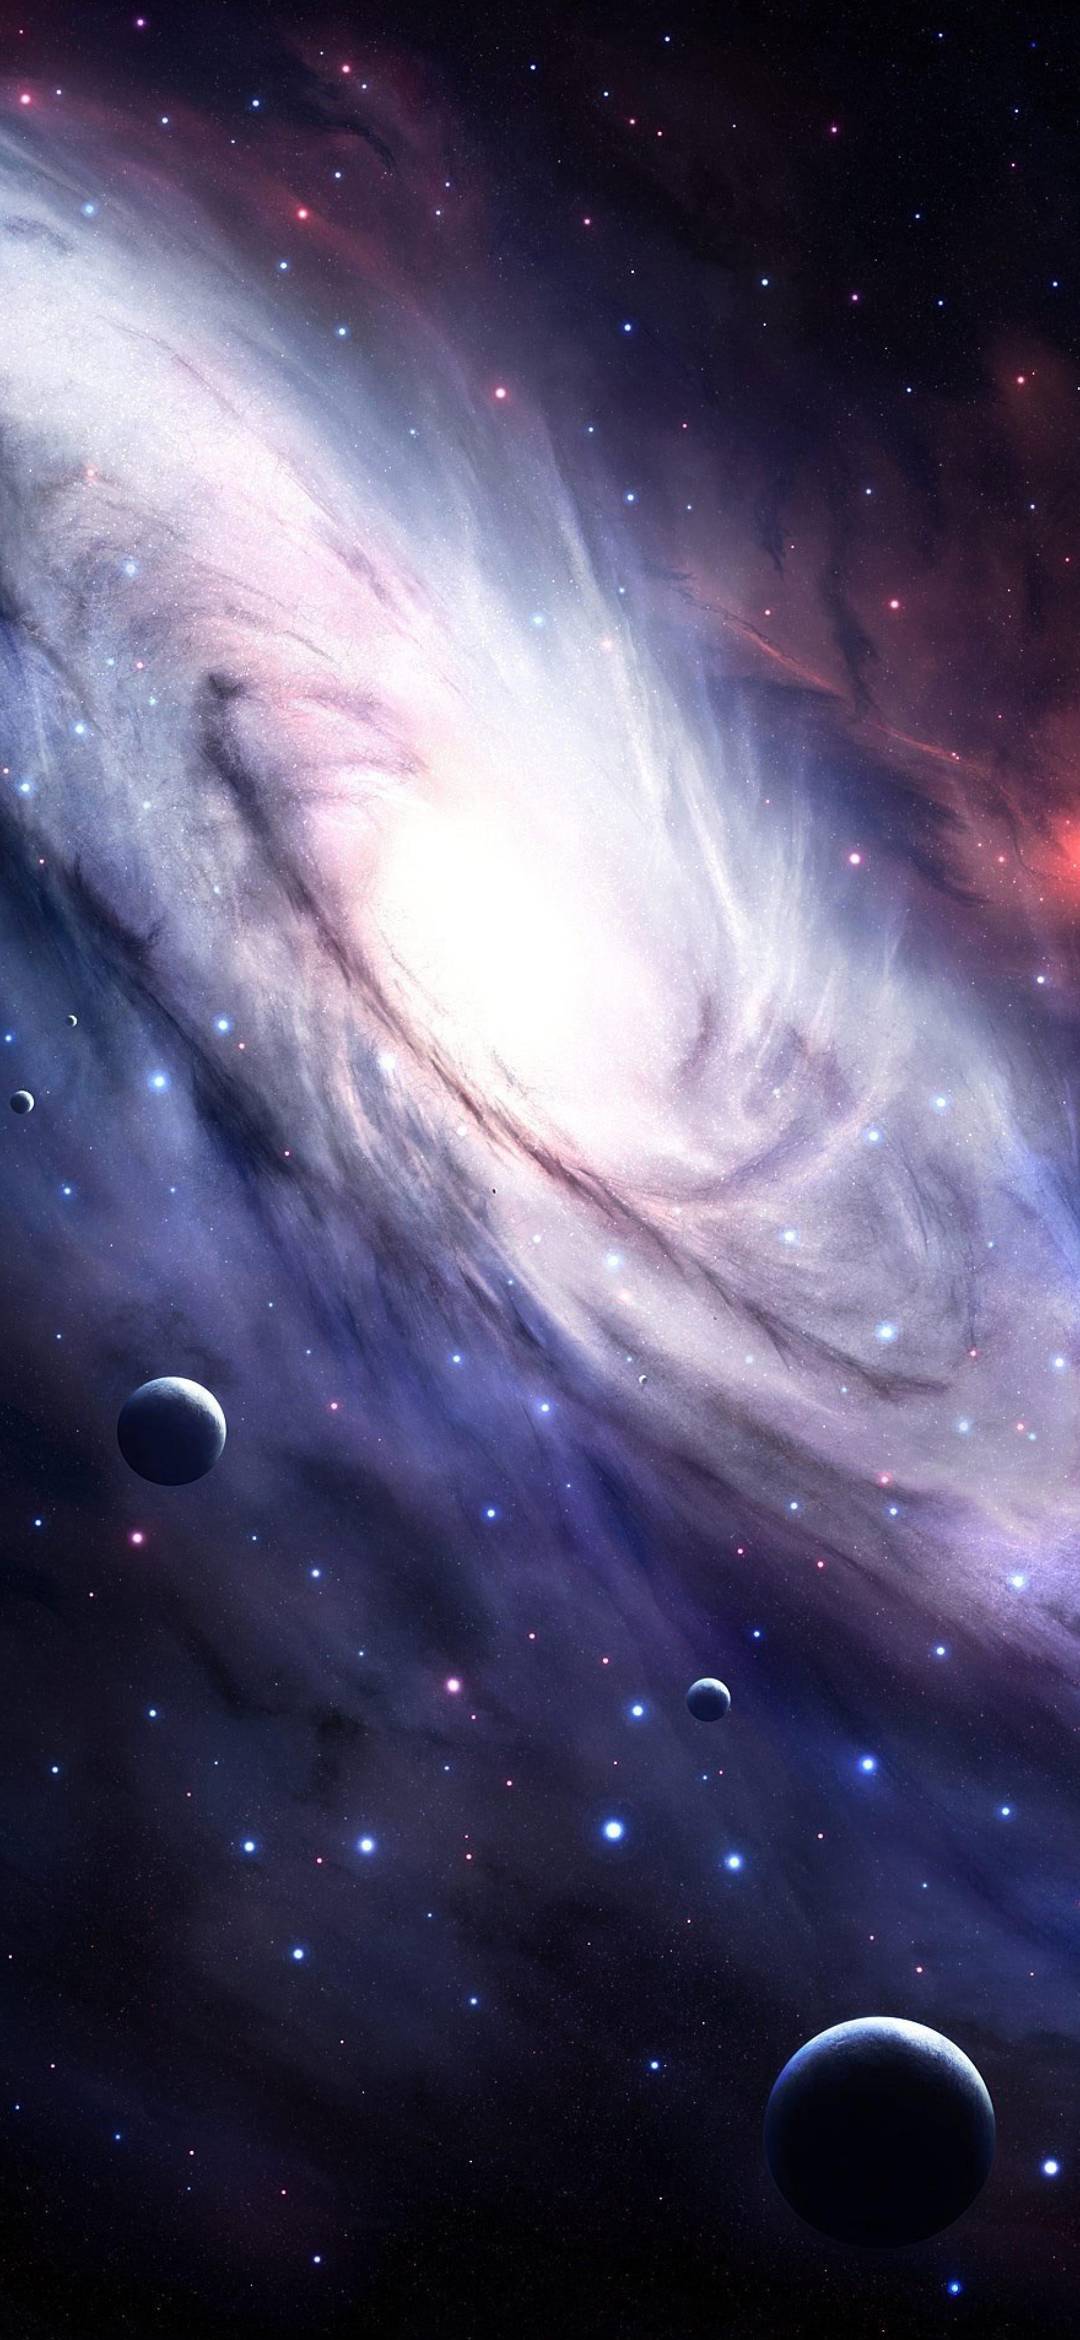 Space Wallpaper for Phone- 191